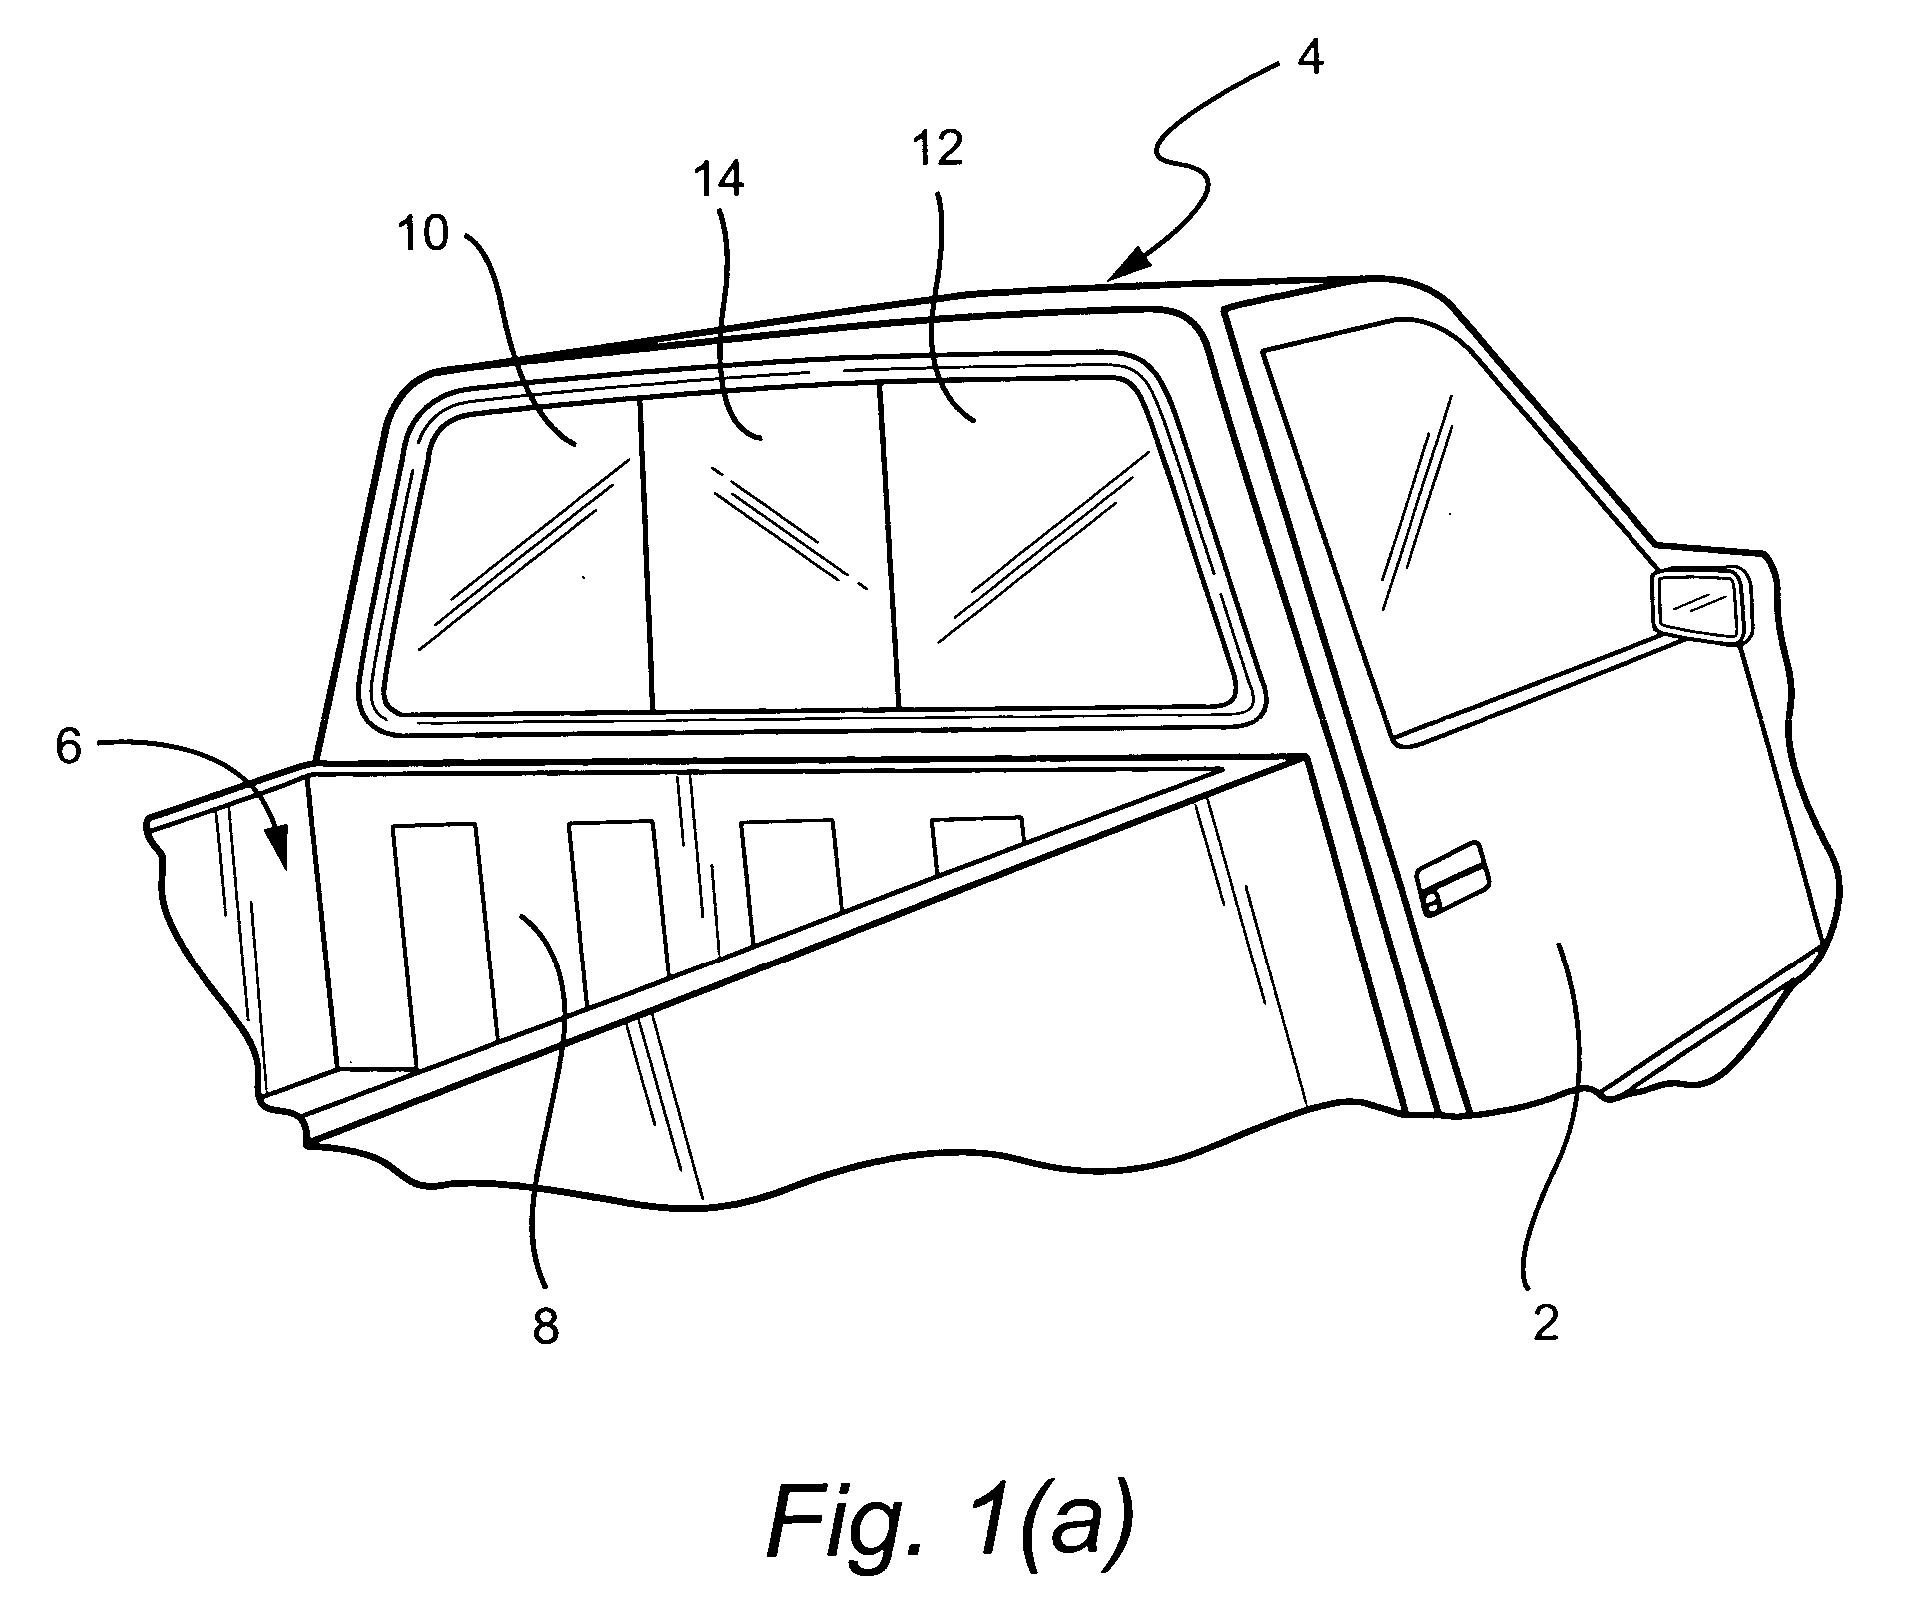 Flush-mounted slider window for pick-up truck with hydrophilic coating on interior surface thereof, and method of making same